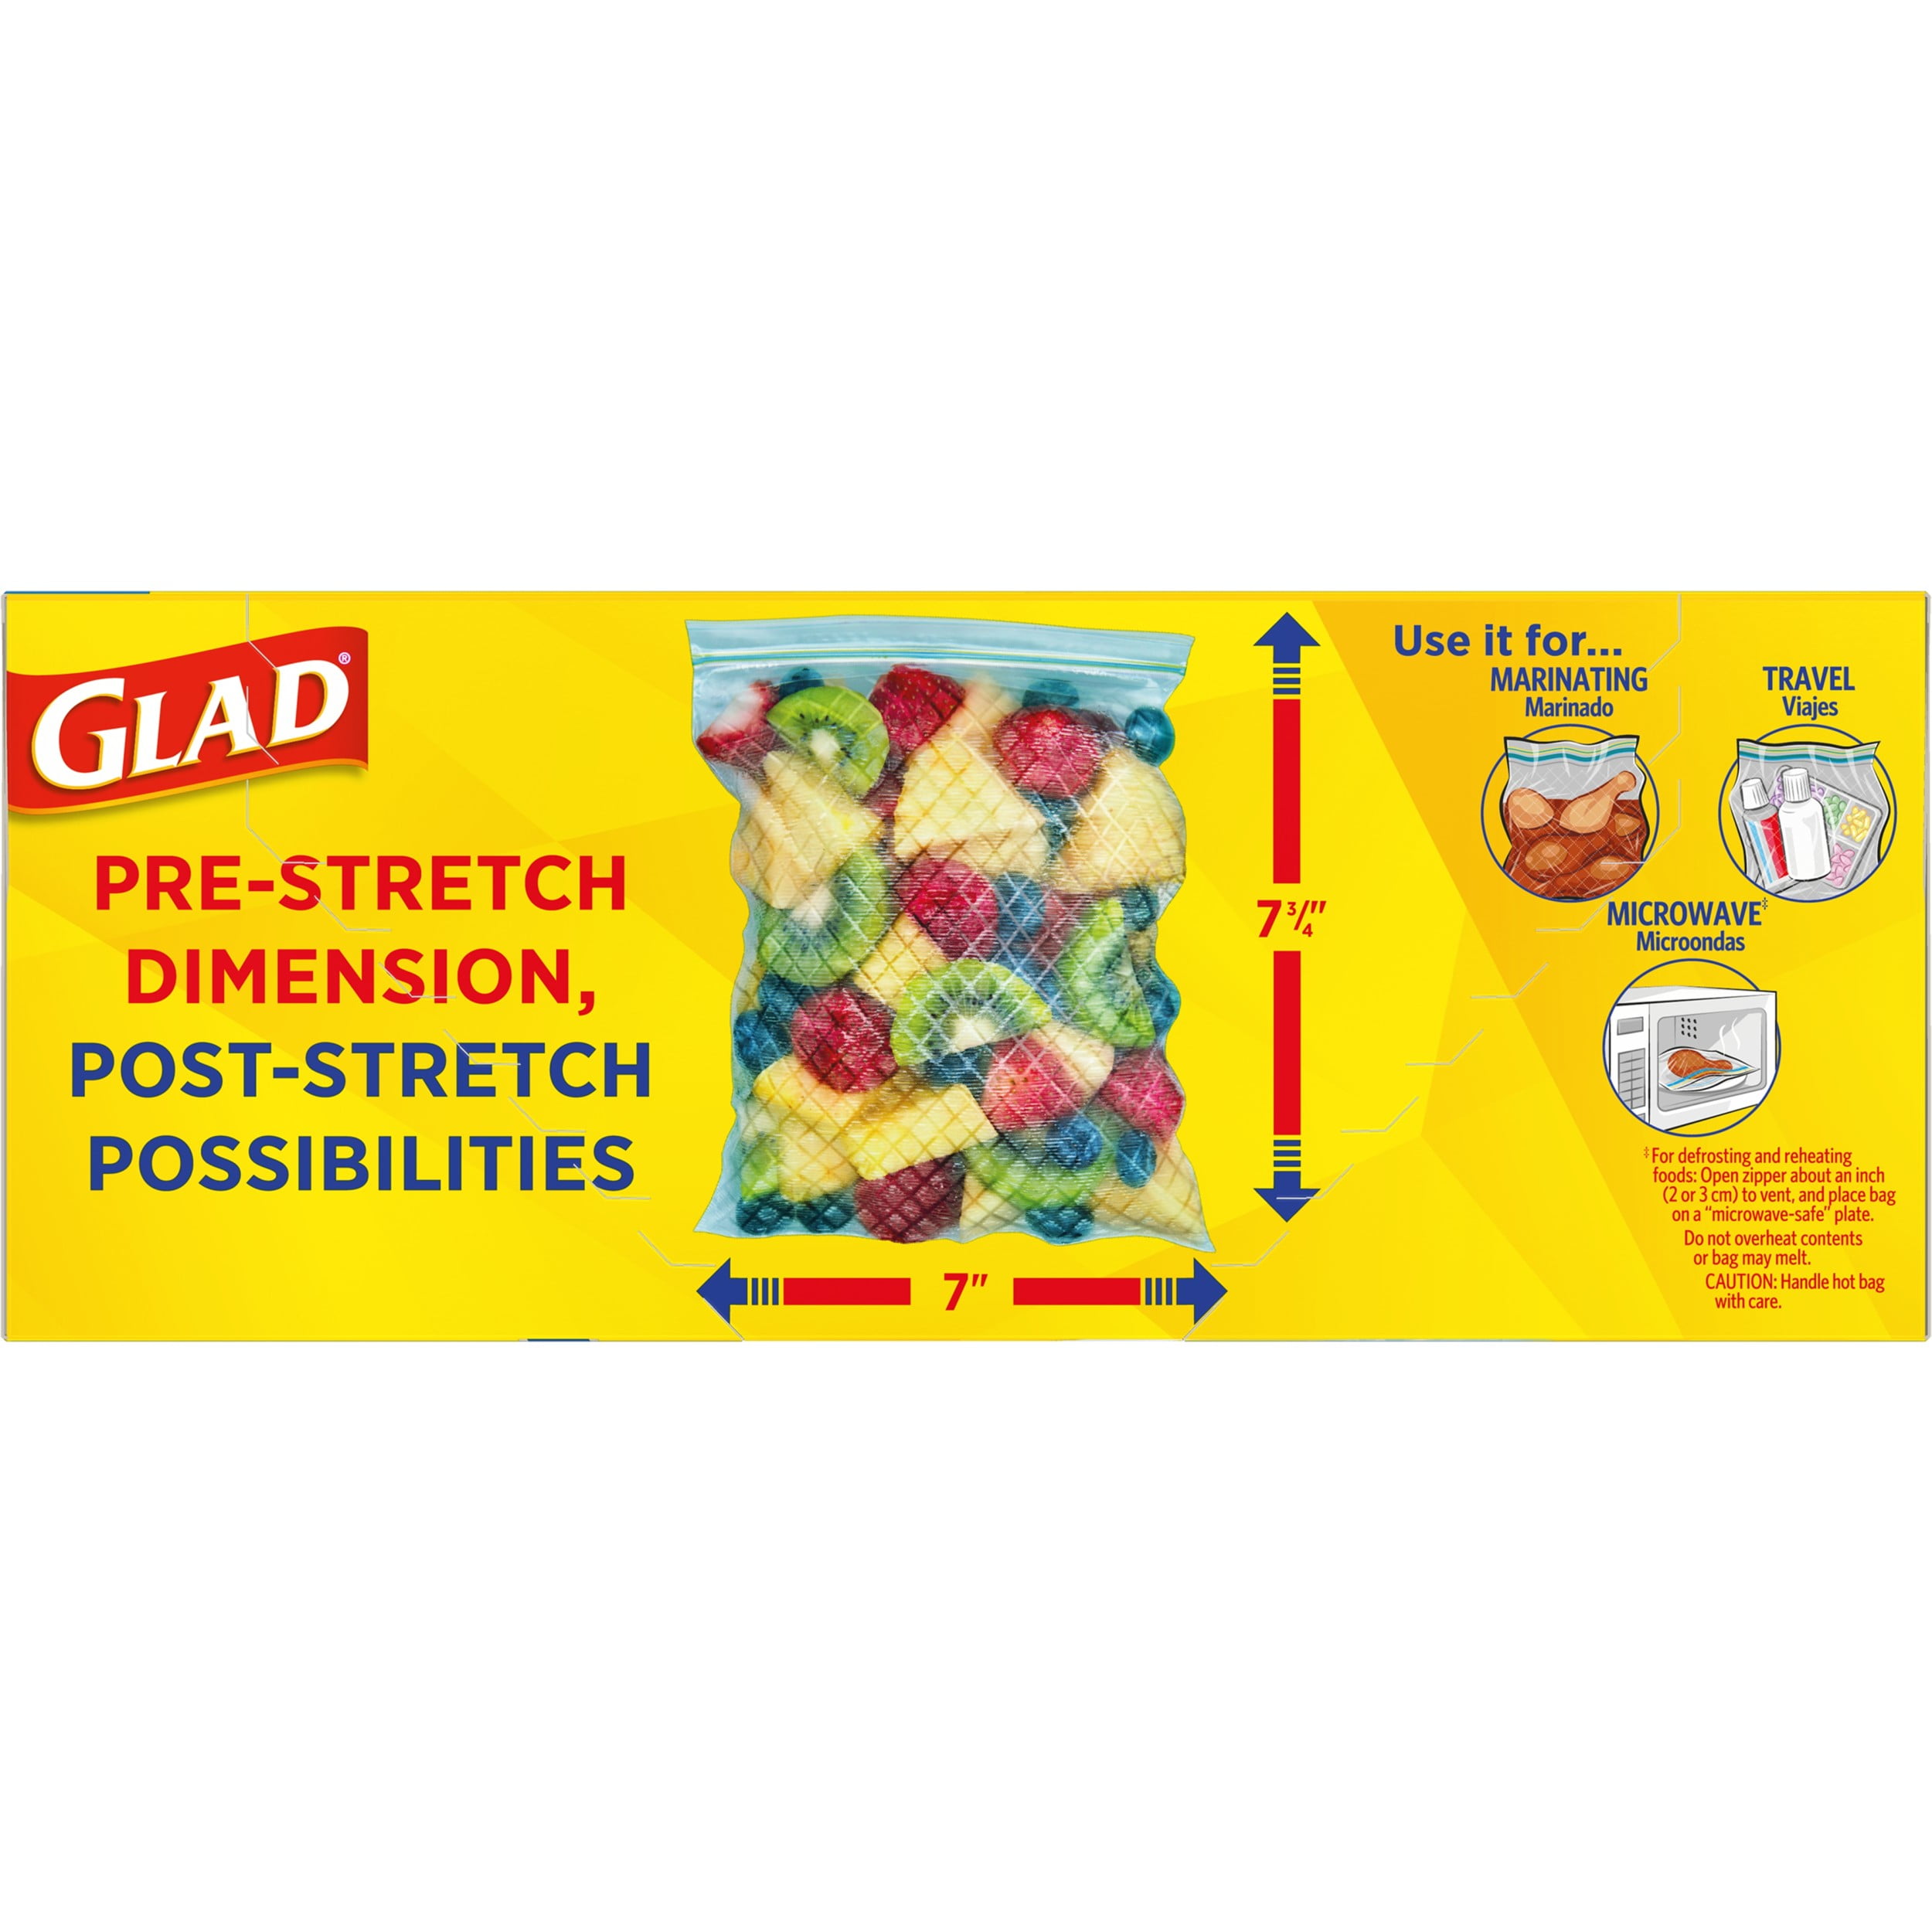 Glad Small Freezer Bags 50 Pack